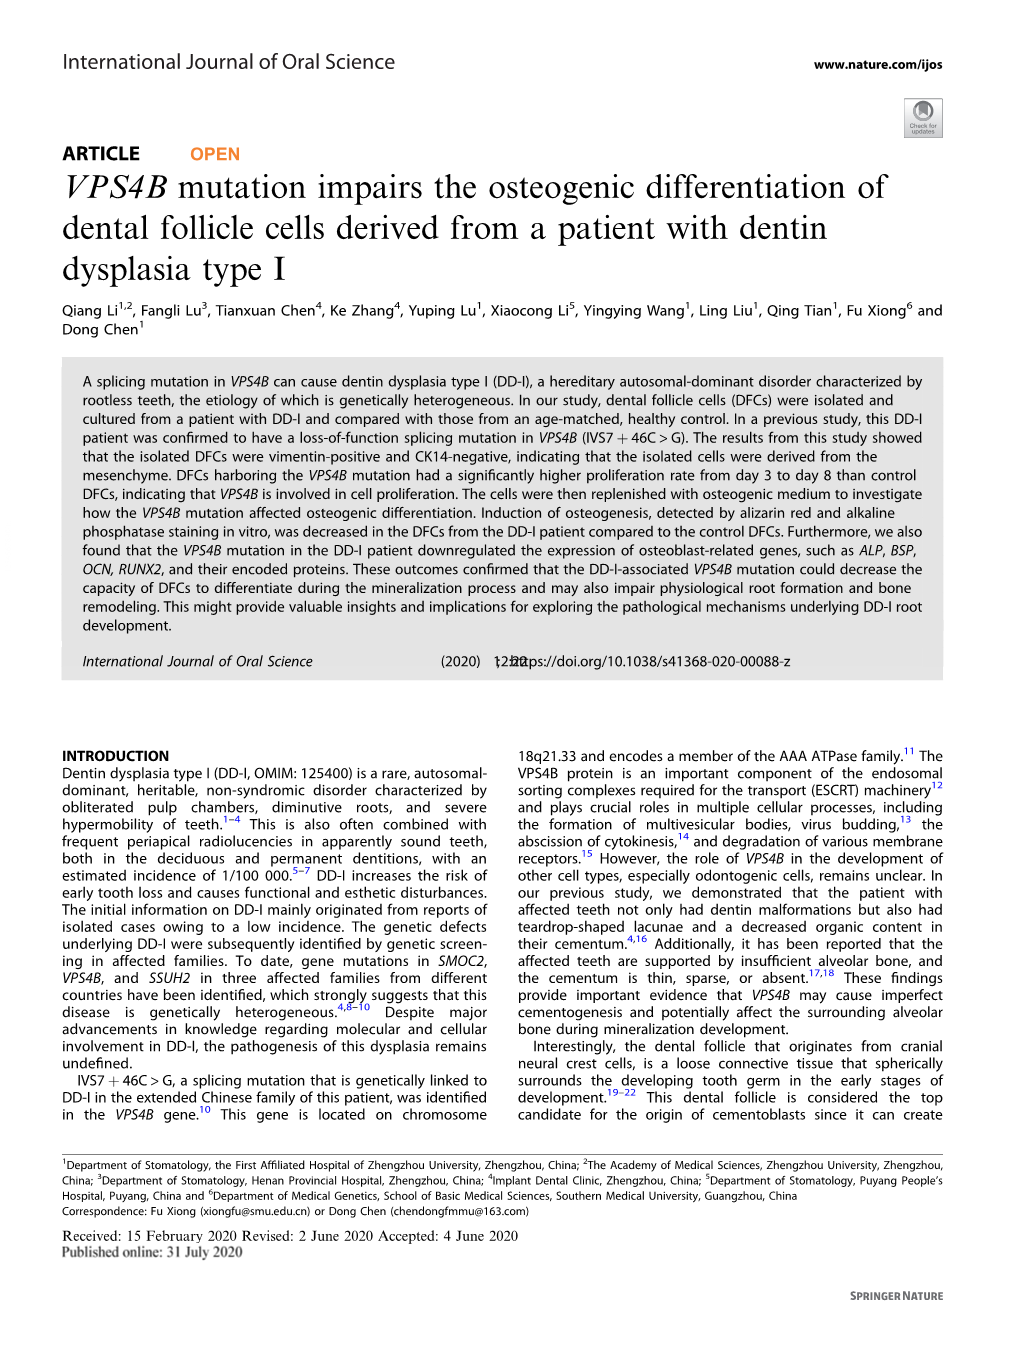 VPS4B Mutation Impairs the Osteogenic Differentiation of Dental Follicle Cells Derived from a Patient with Dentin Dysplasia Type I